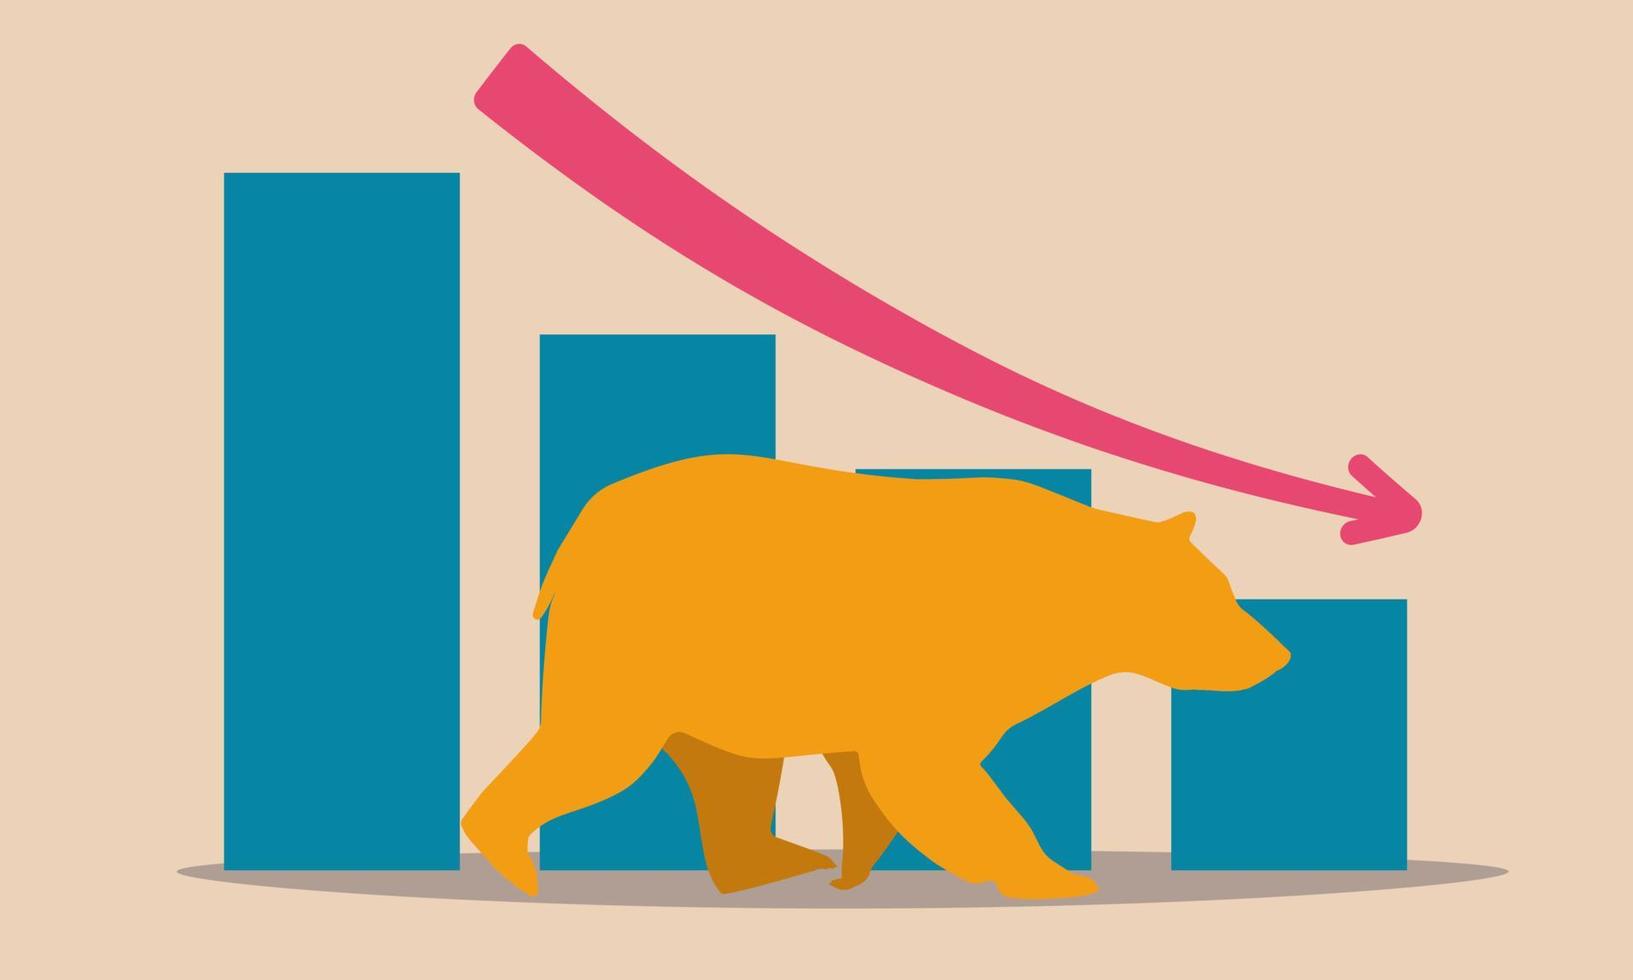 Bear stock market and forex sell index. Trend graph down and economic risk recession vector illustration concept. Investor loss money and idea forecast. Crisis crash currency and business impact